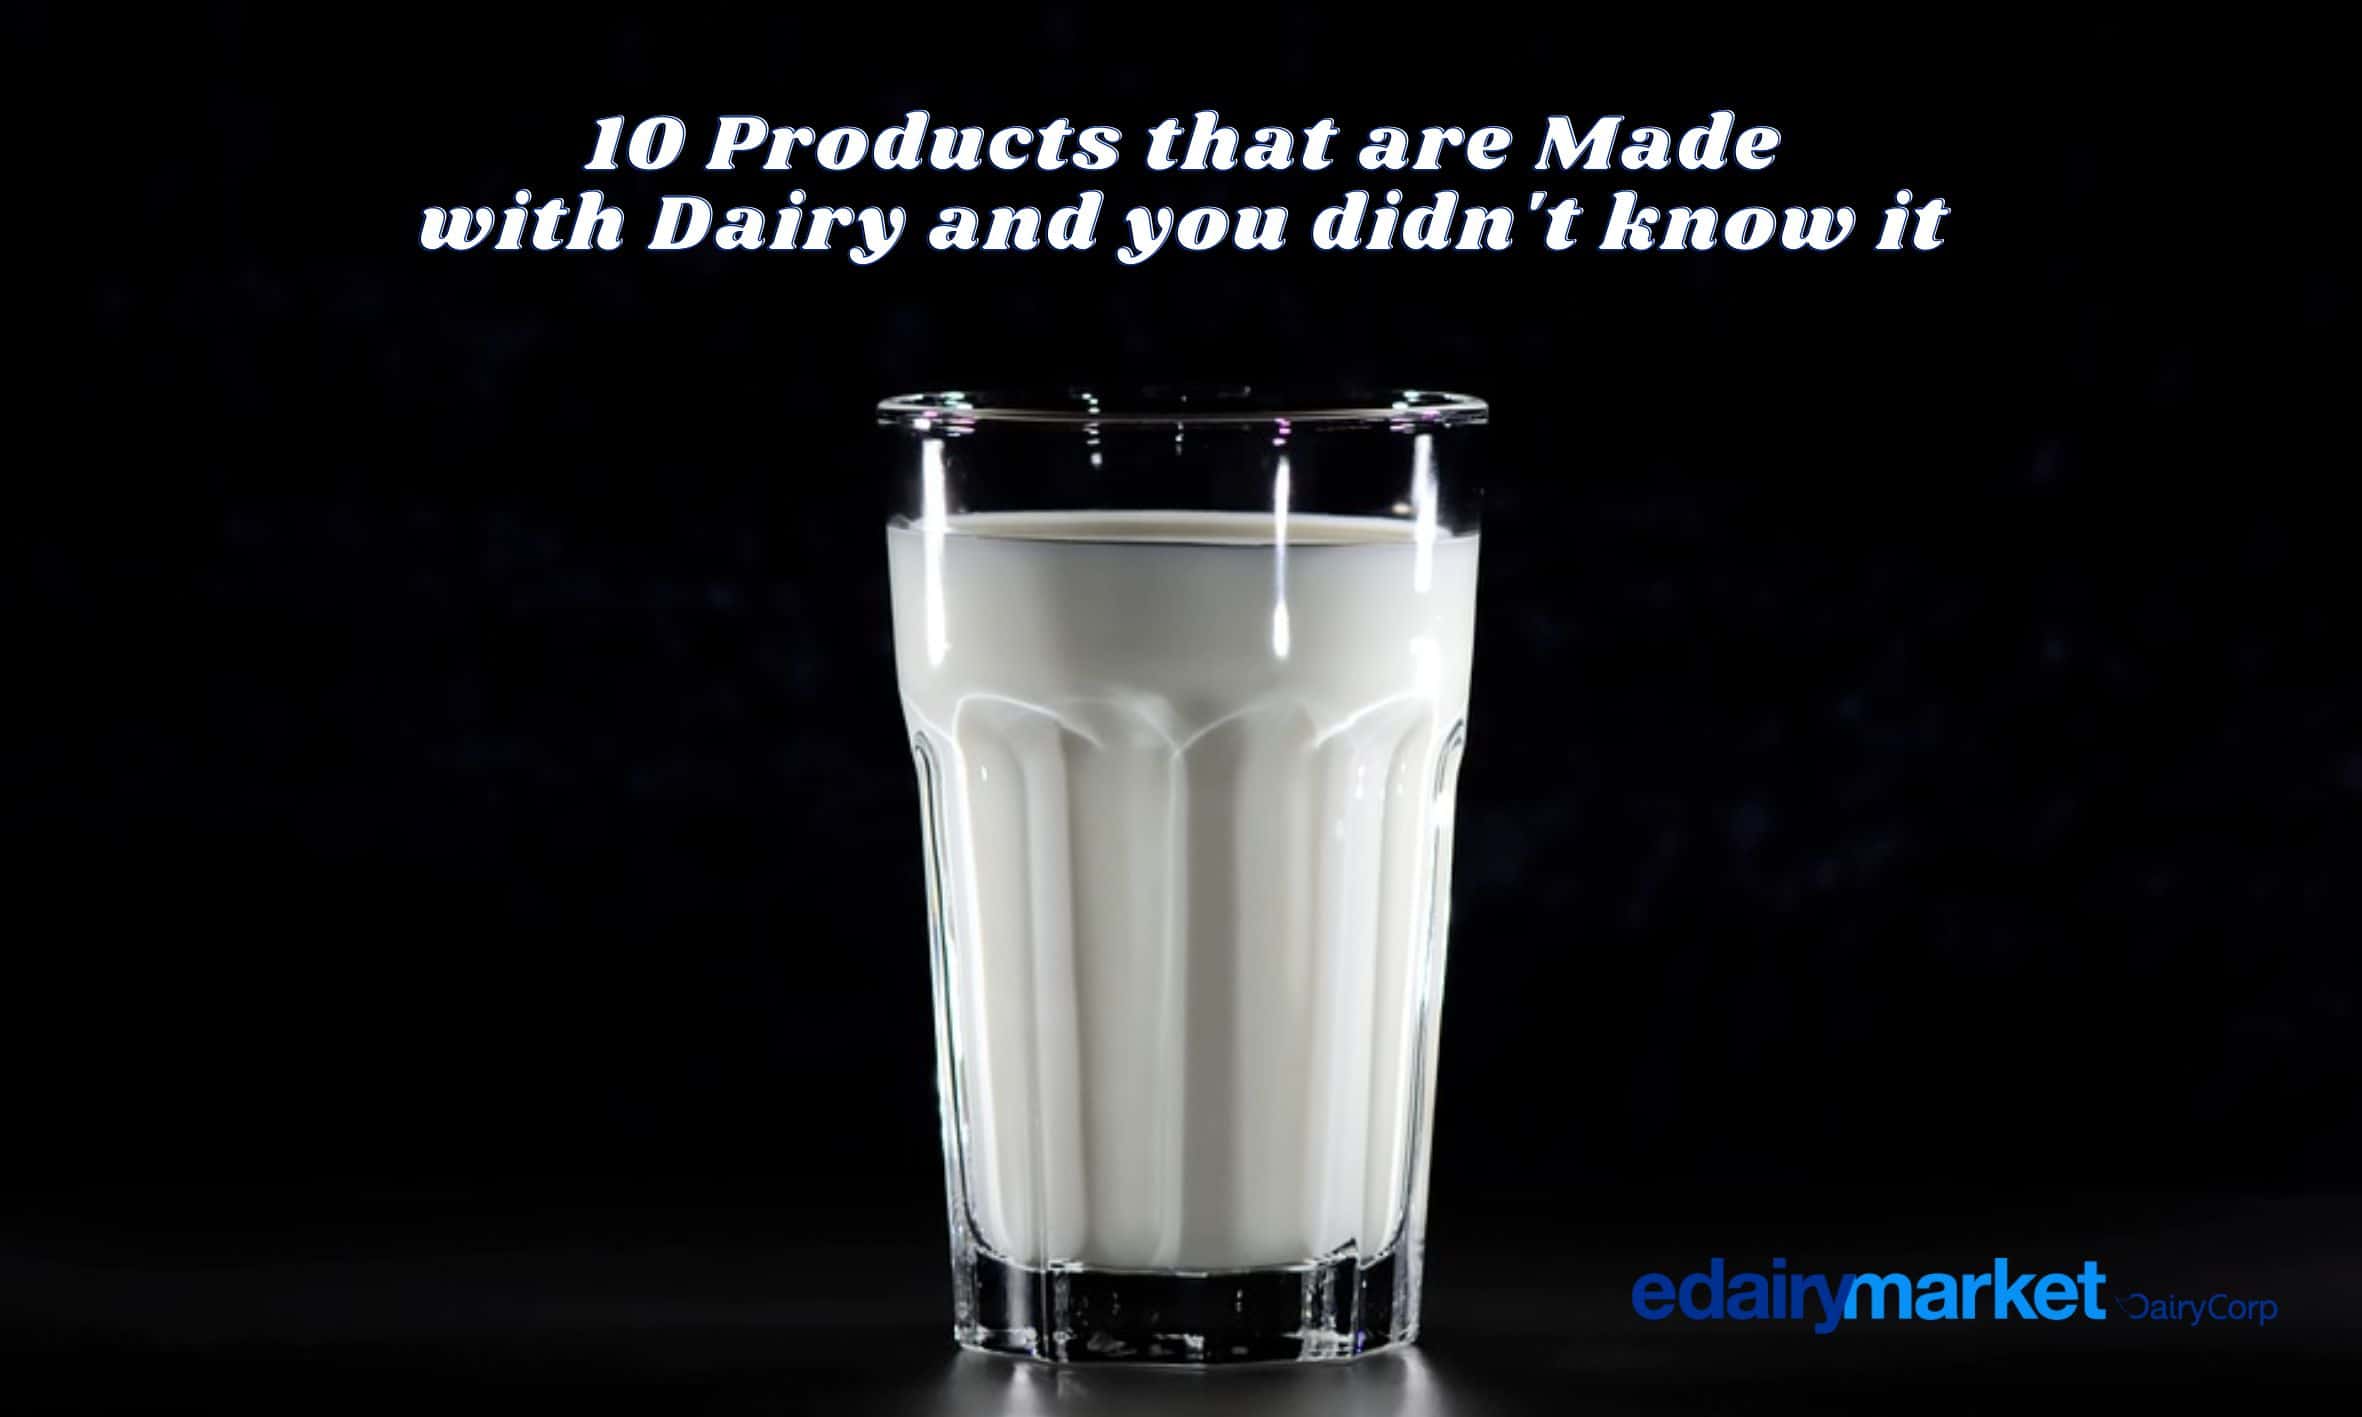 10 Products that are Made with Dairy and you didn't know it